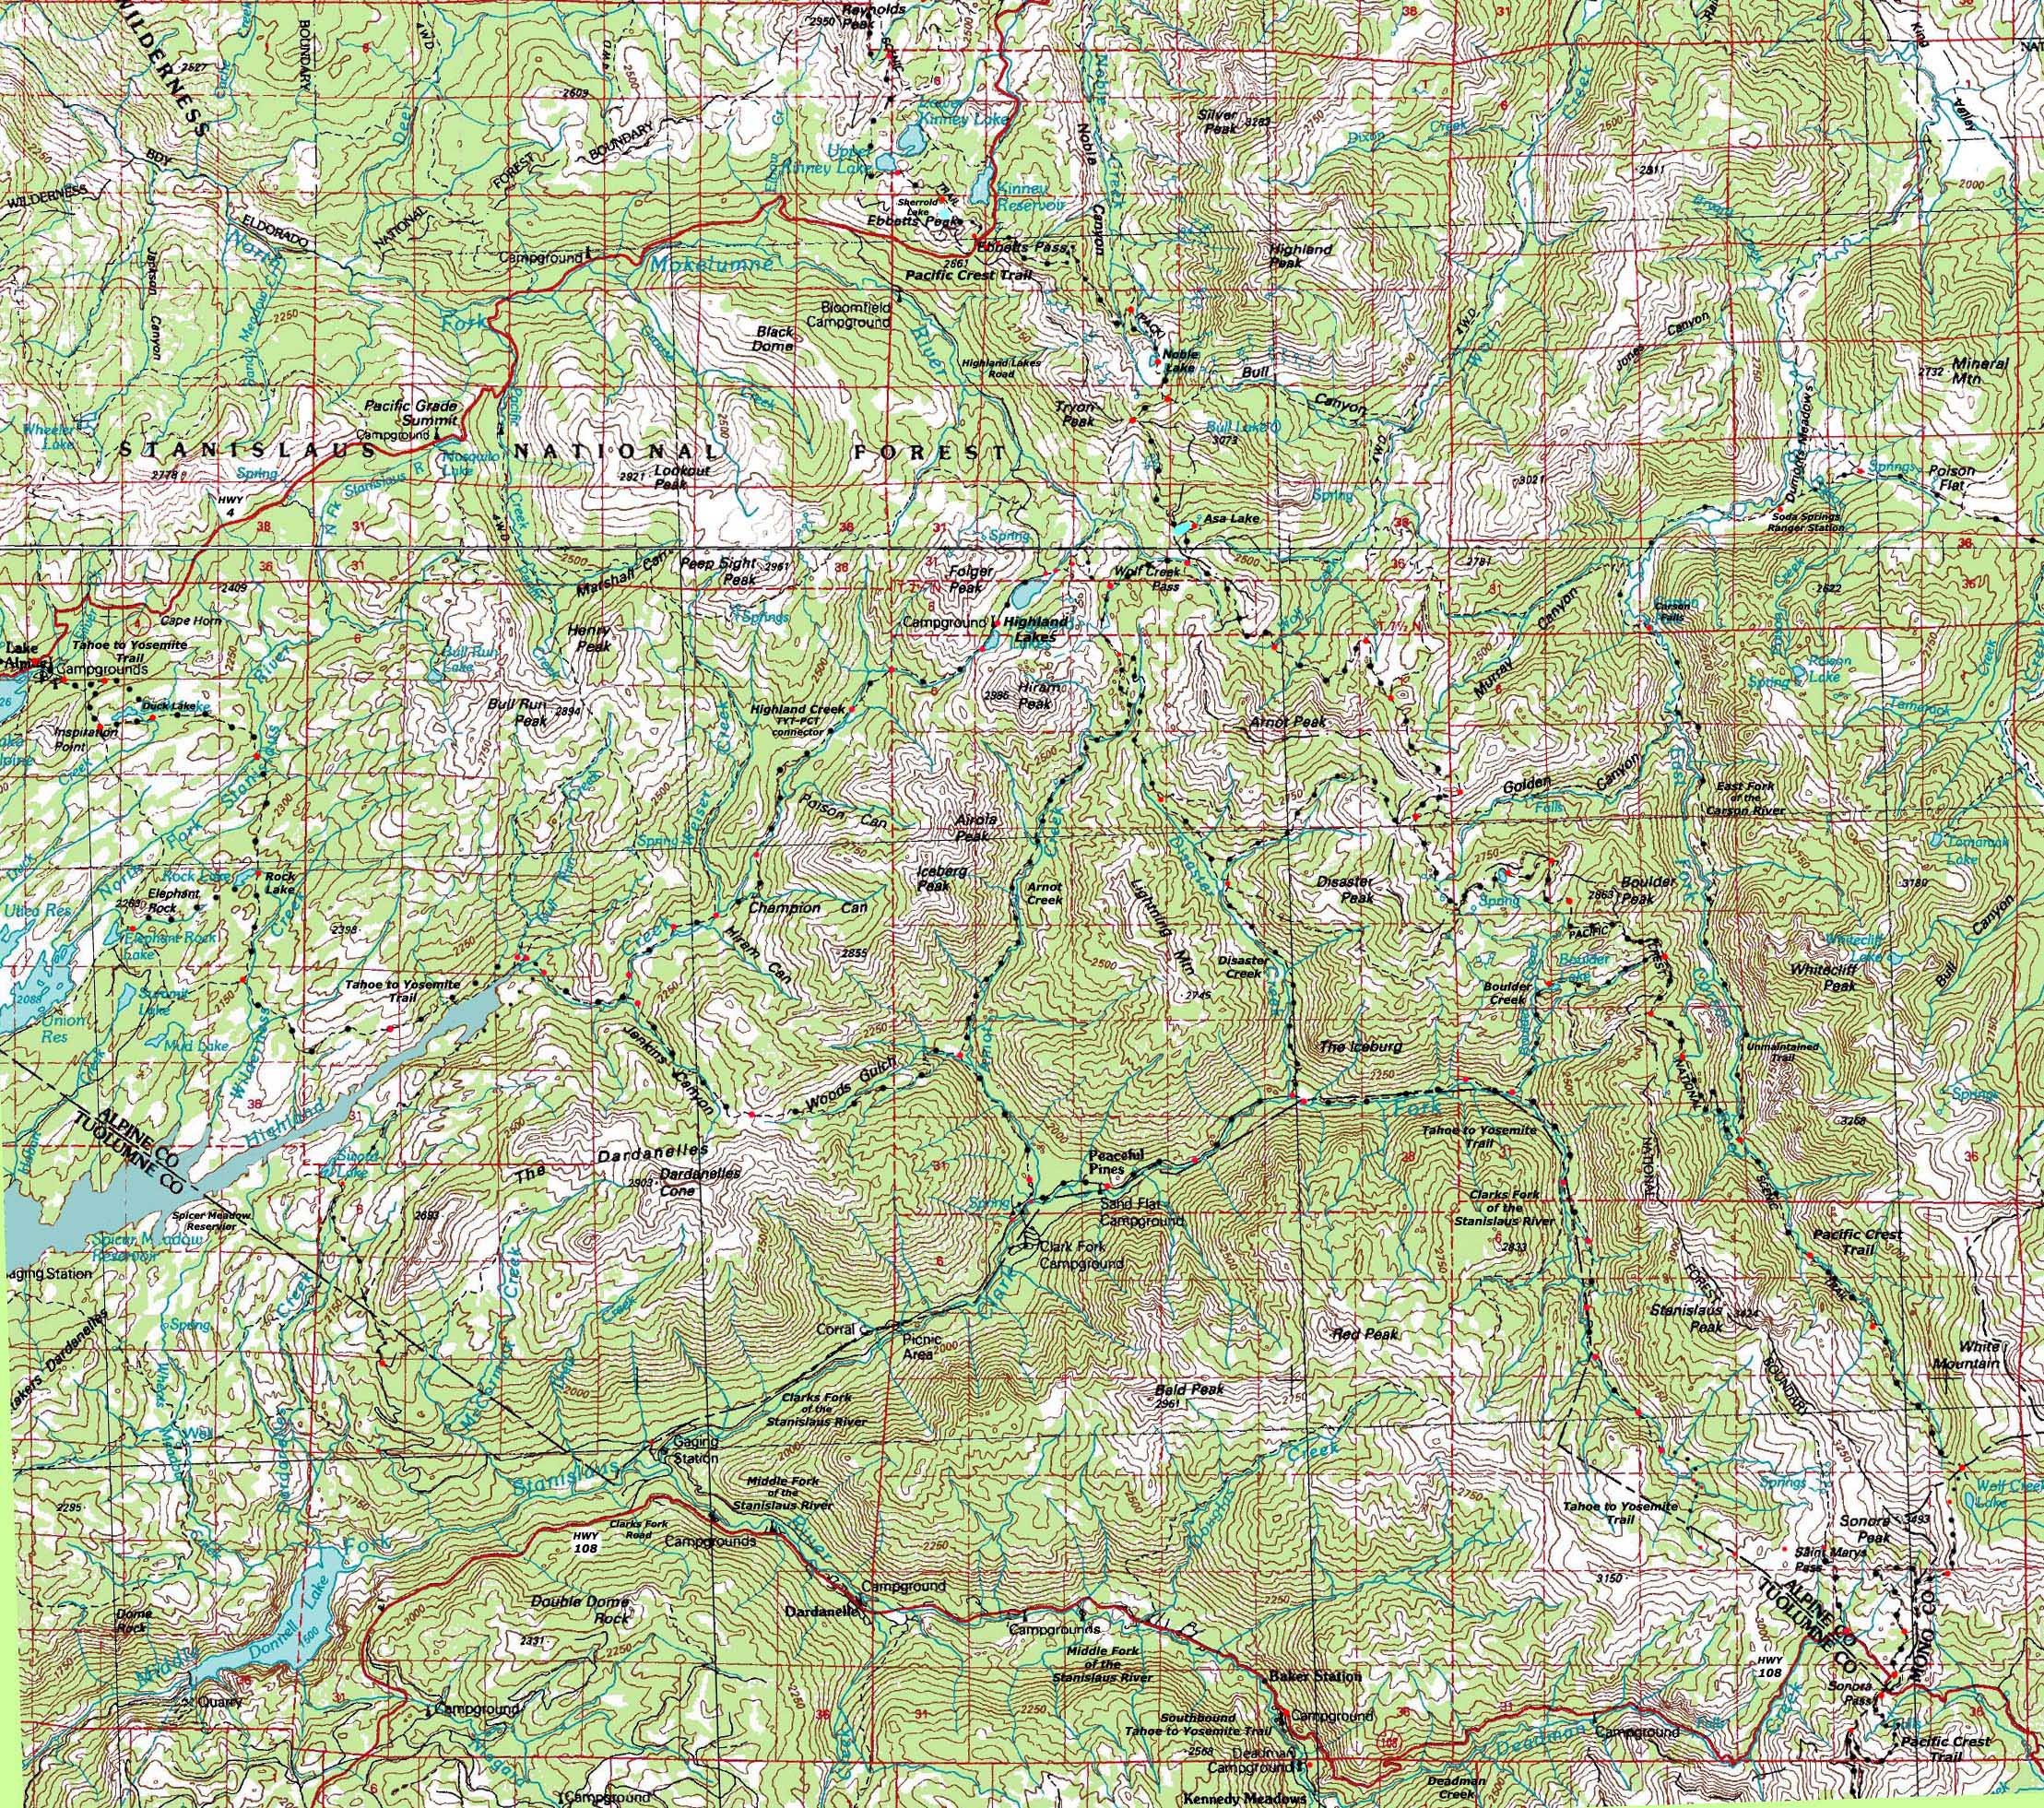 Carson Iceberg Wilderness topo map covering Pacific Crest Trail and Tahoe to Yosemite Trail.